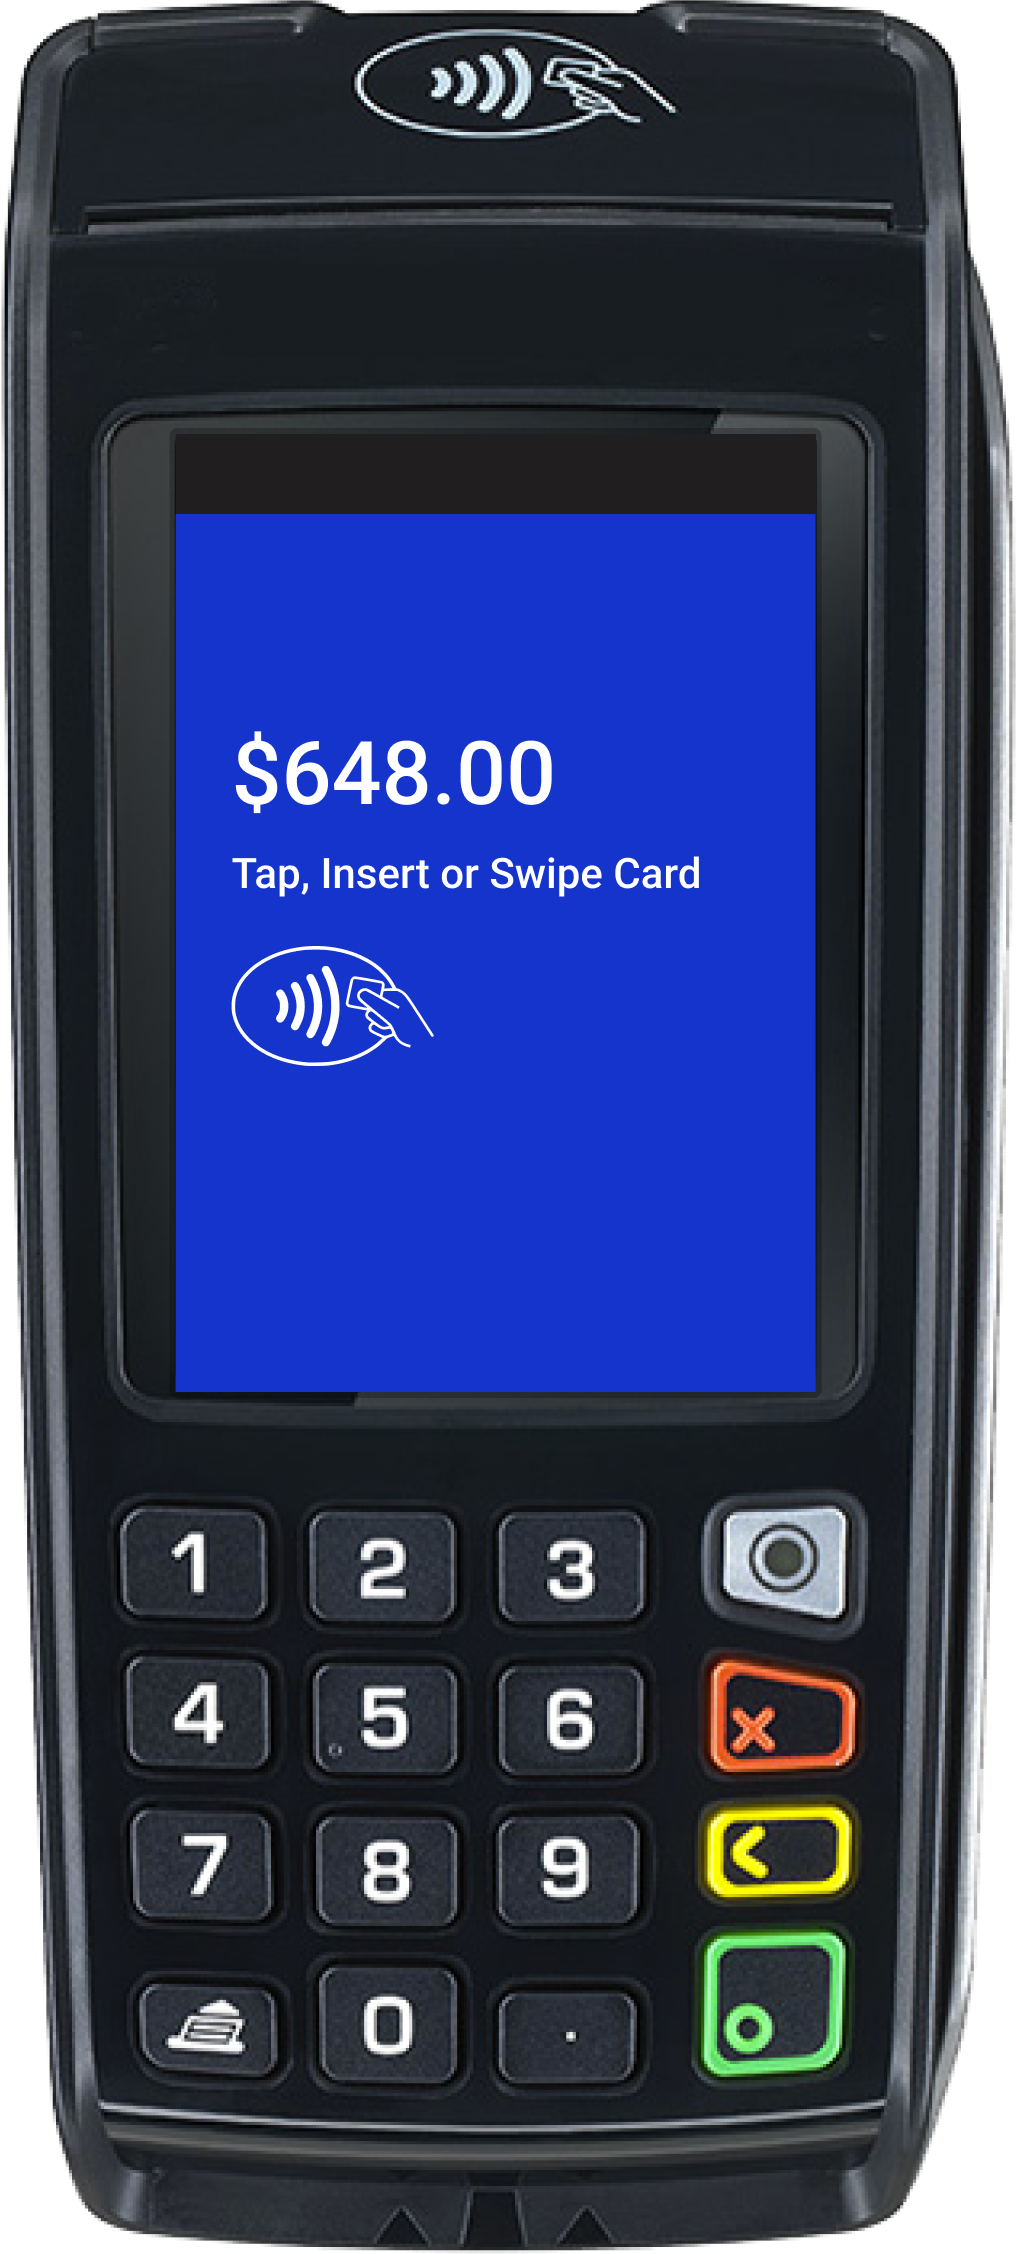 Canada portrait 2 style payment terminal, initiate purchase